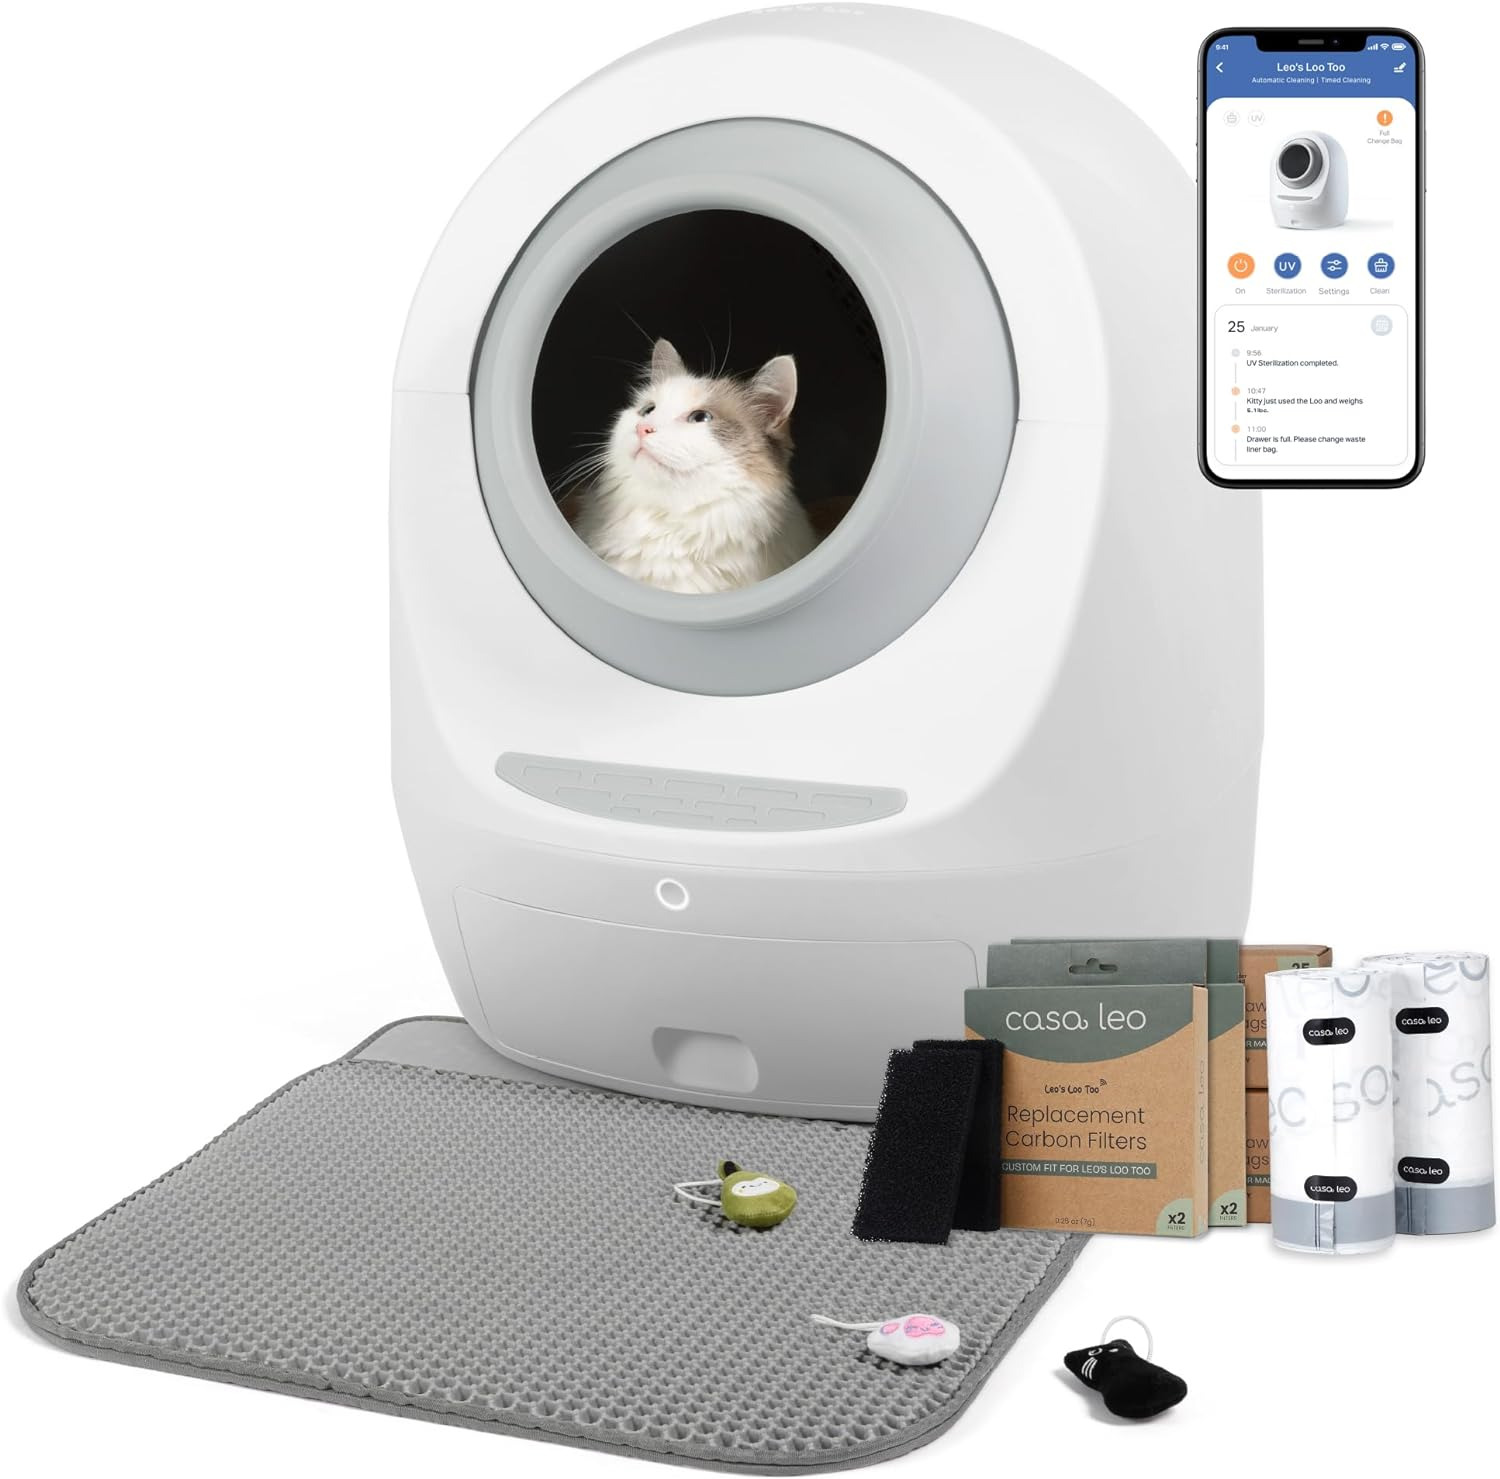 Casa Leo Loo Too Self-Cleaning Litter Box with Anti-Pinch Sensors, Odor Removal,